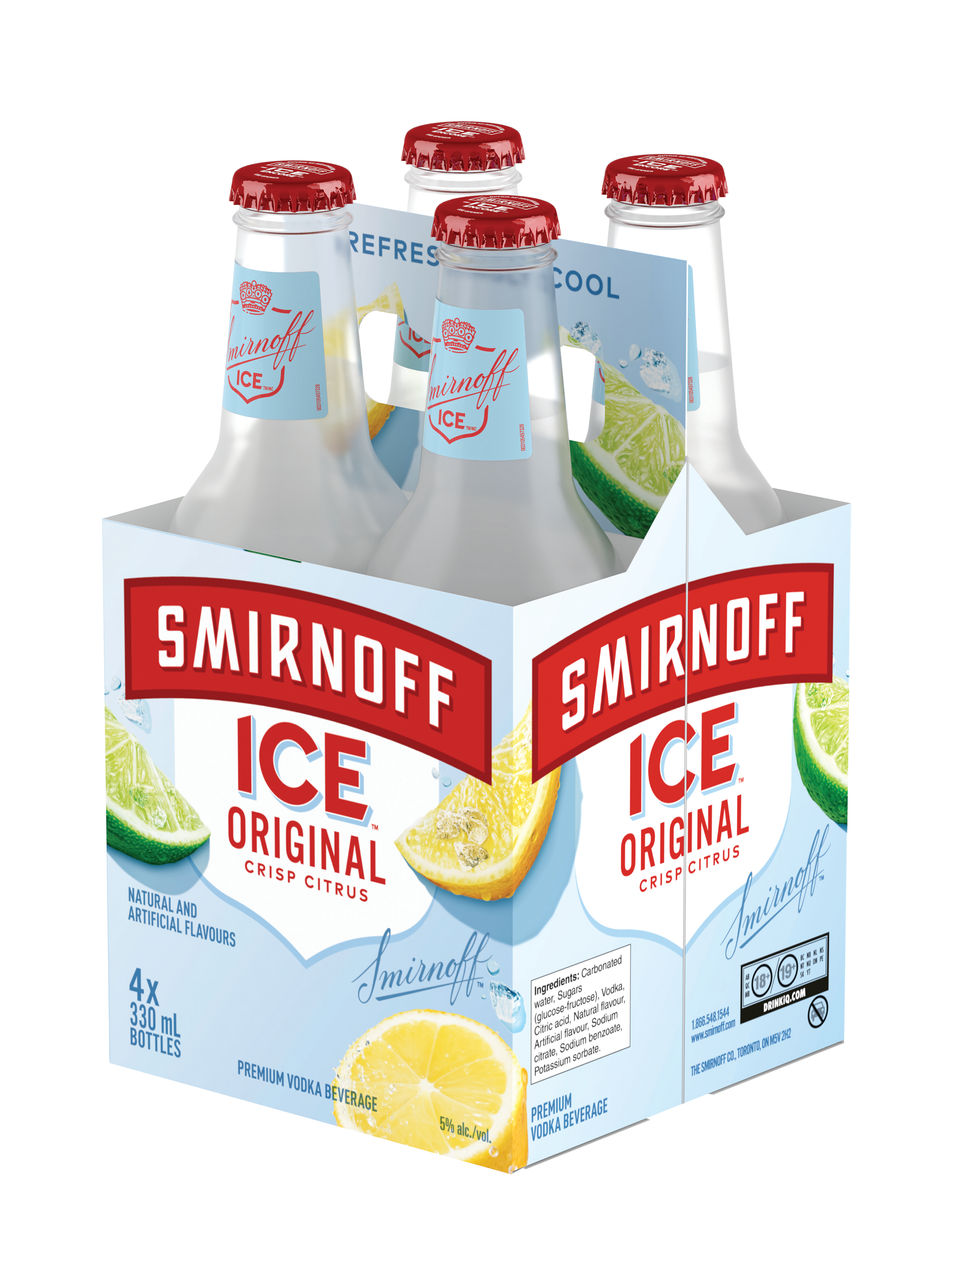 How Much are Smirnoff Ice Coolers 